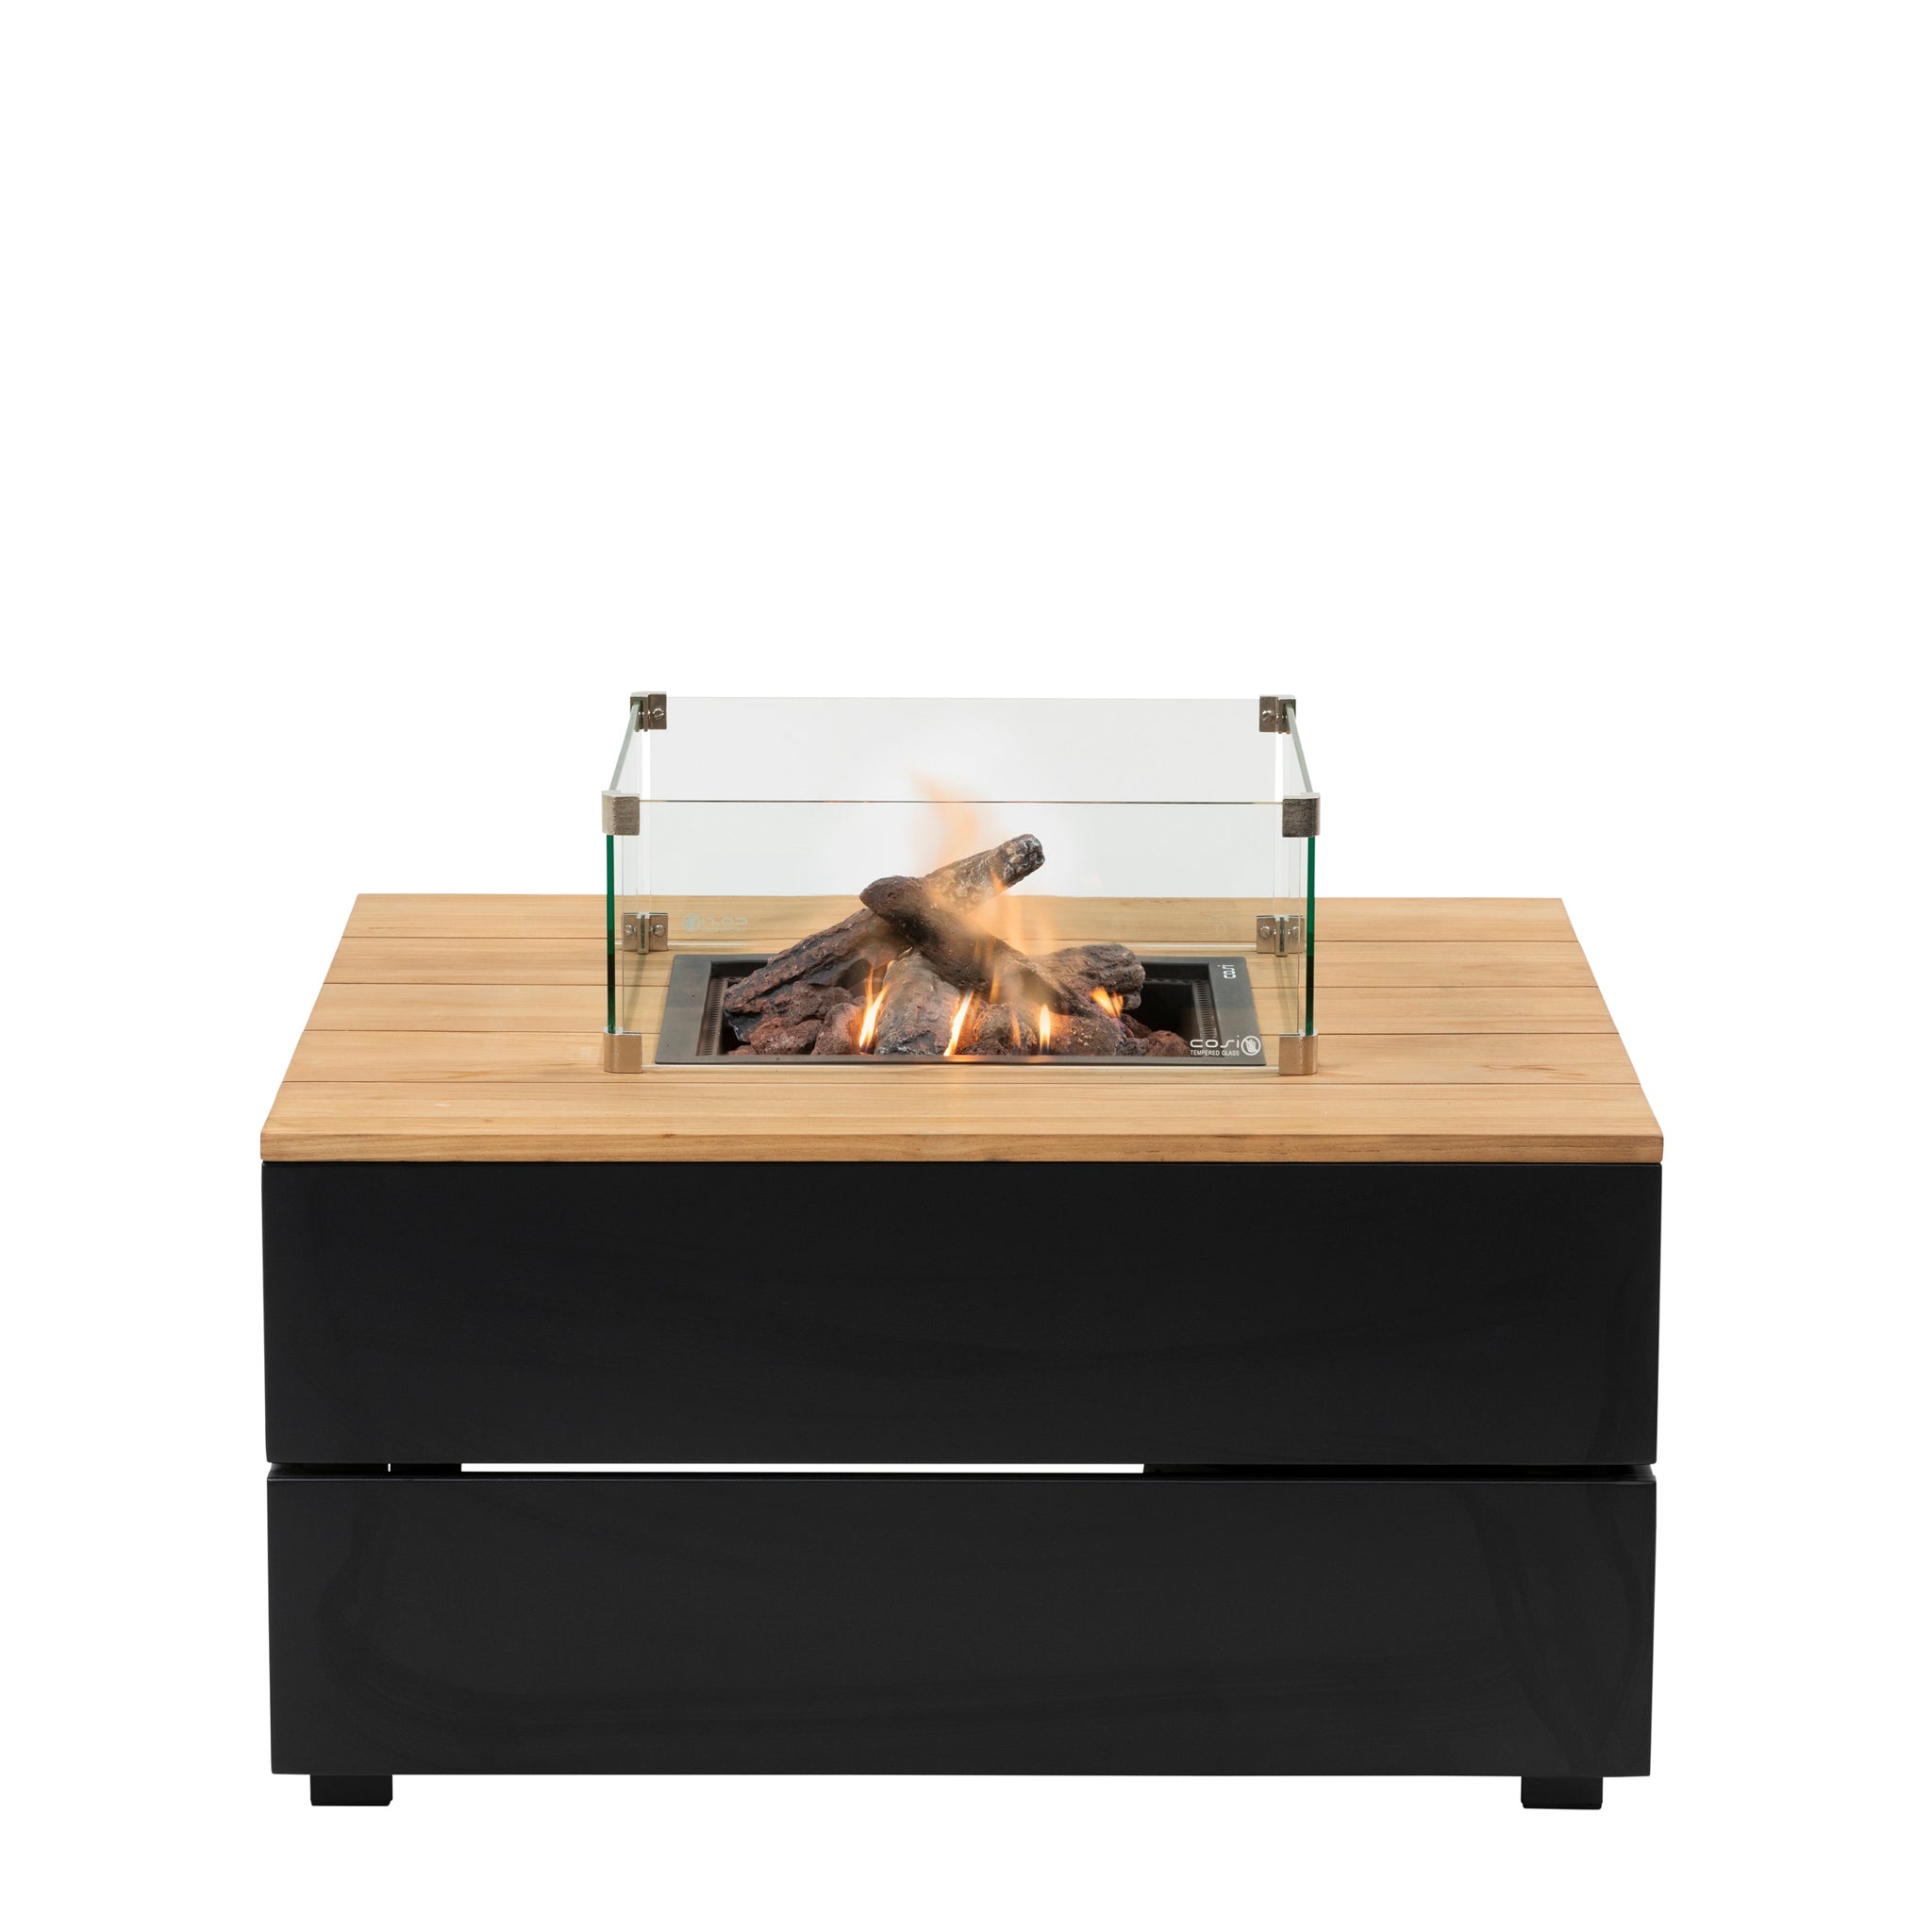 Cosipure 100 Black and Teak Square Fire Pit